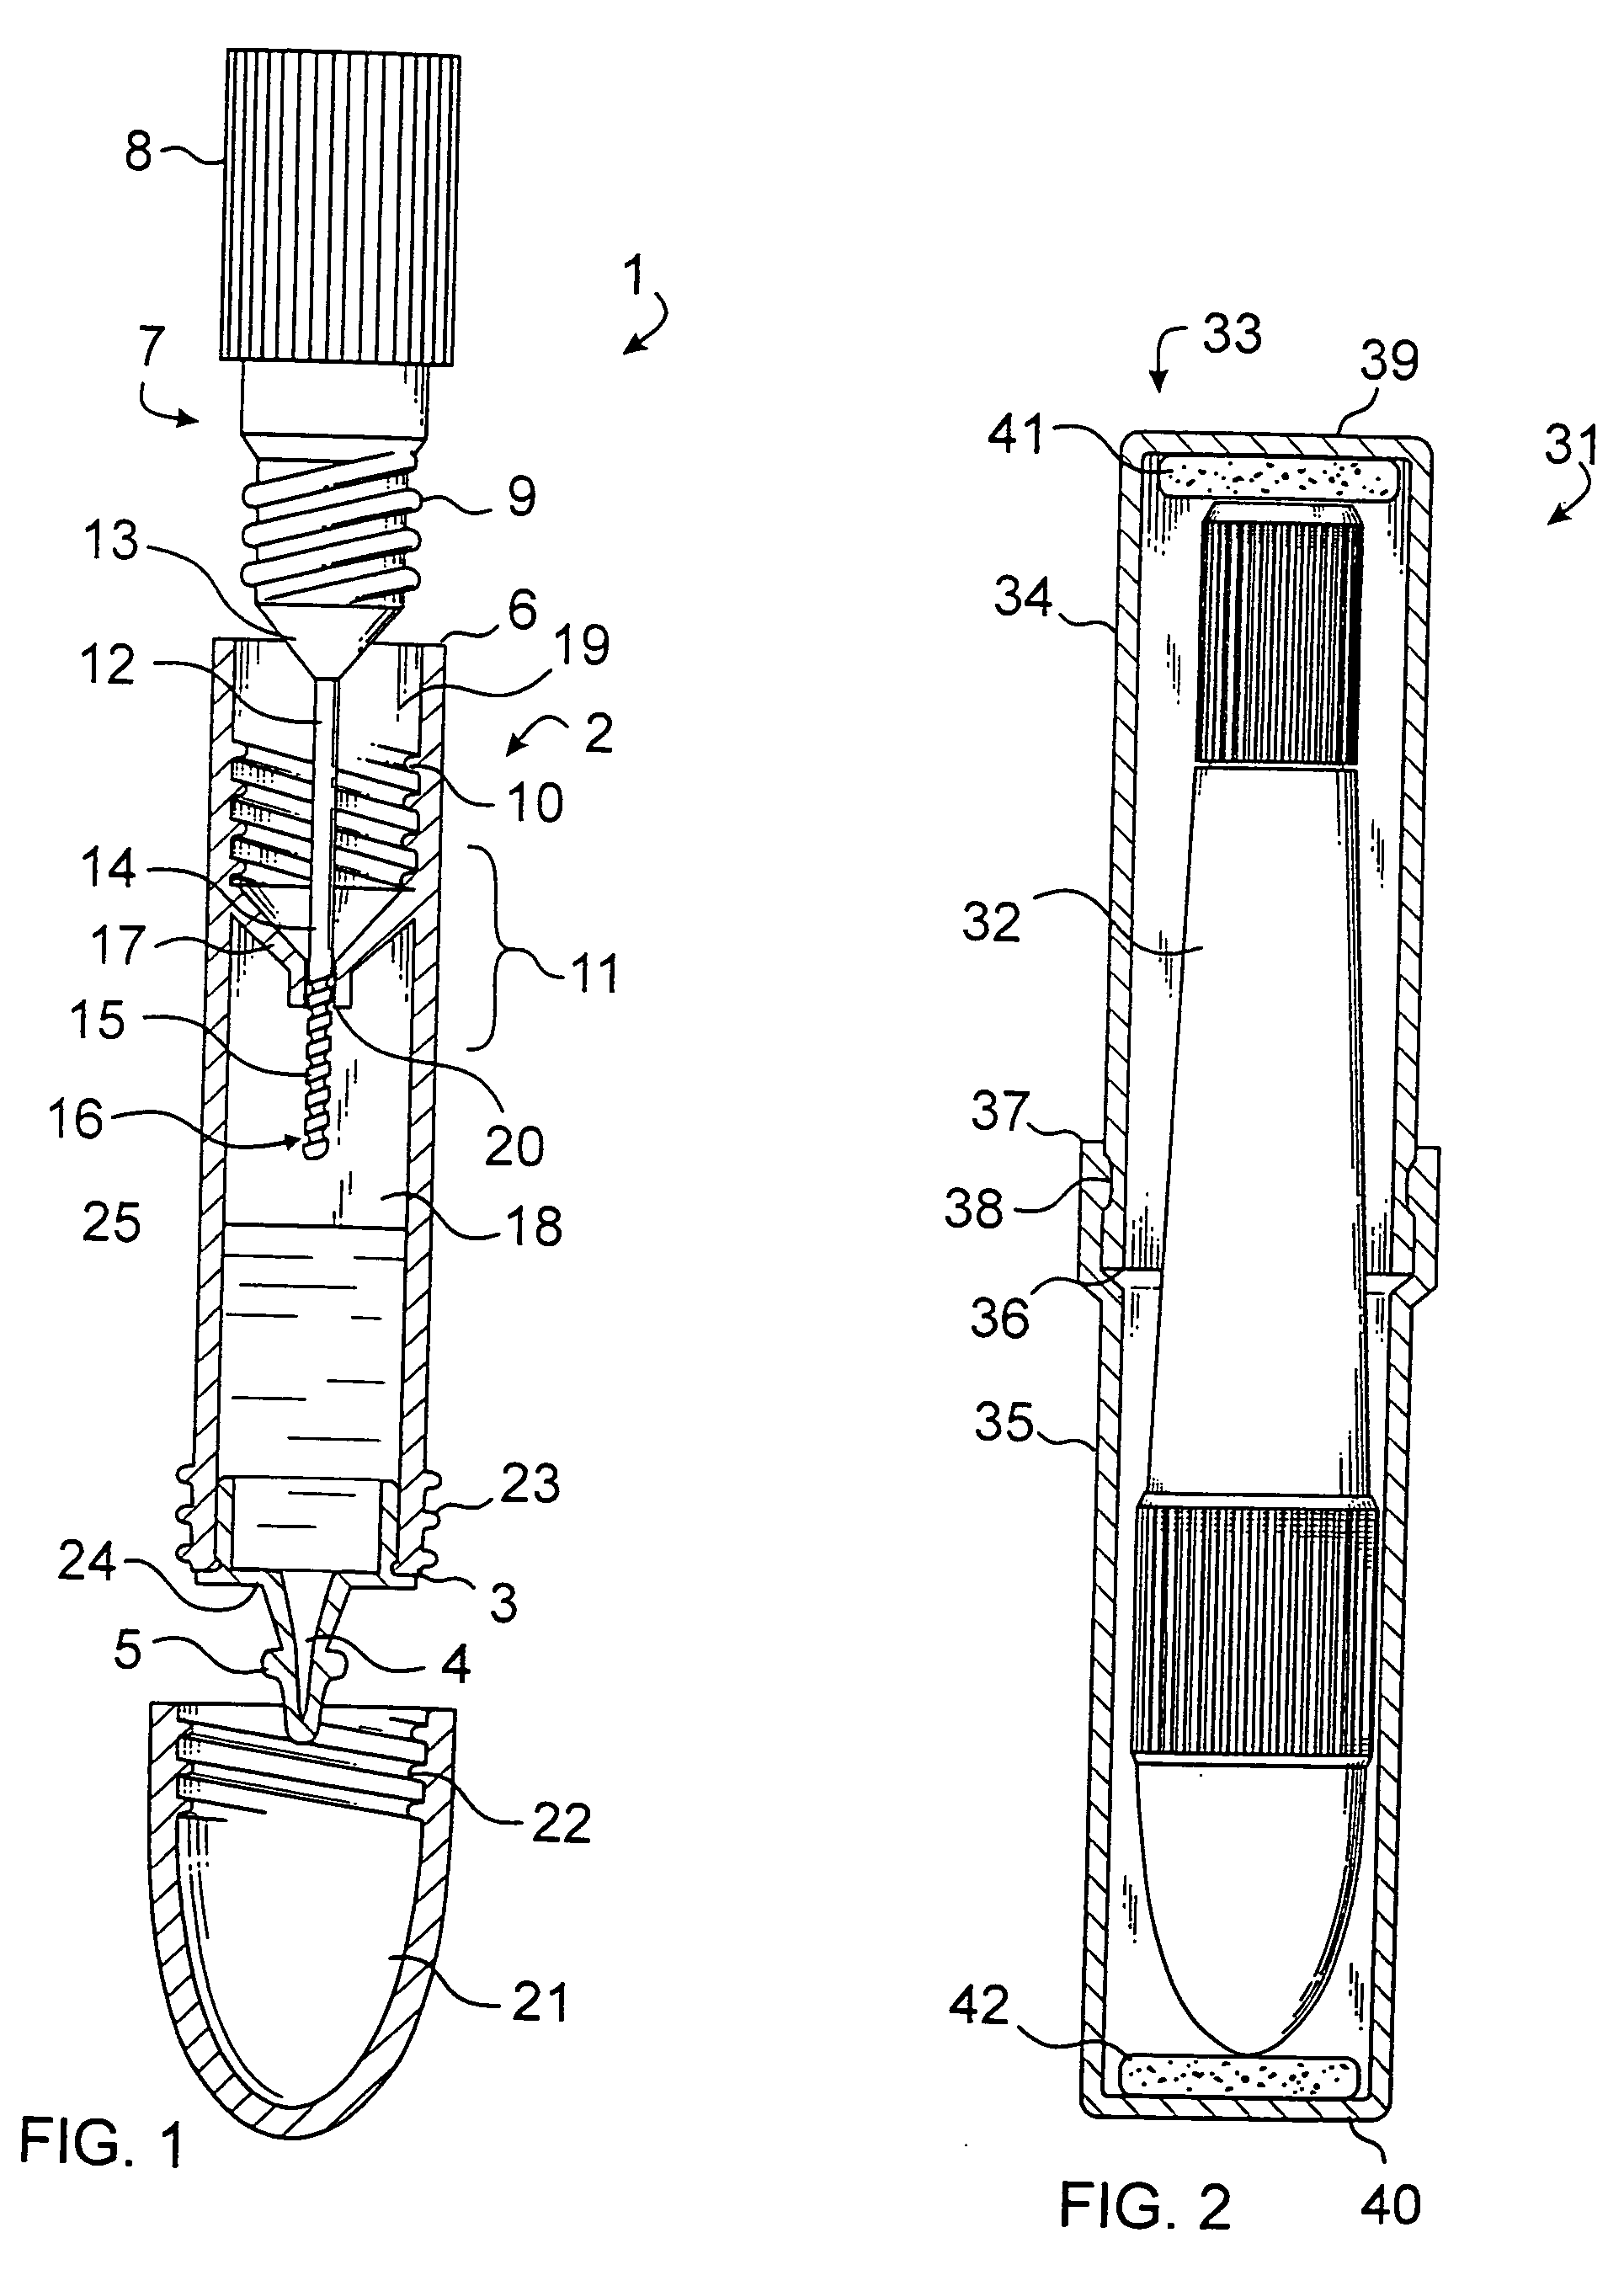 Specimen collection and application apparatus